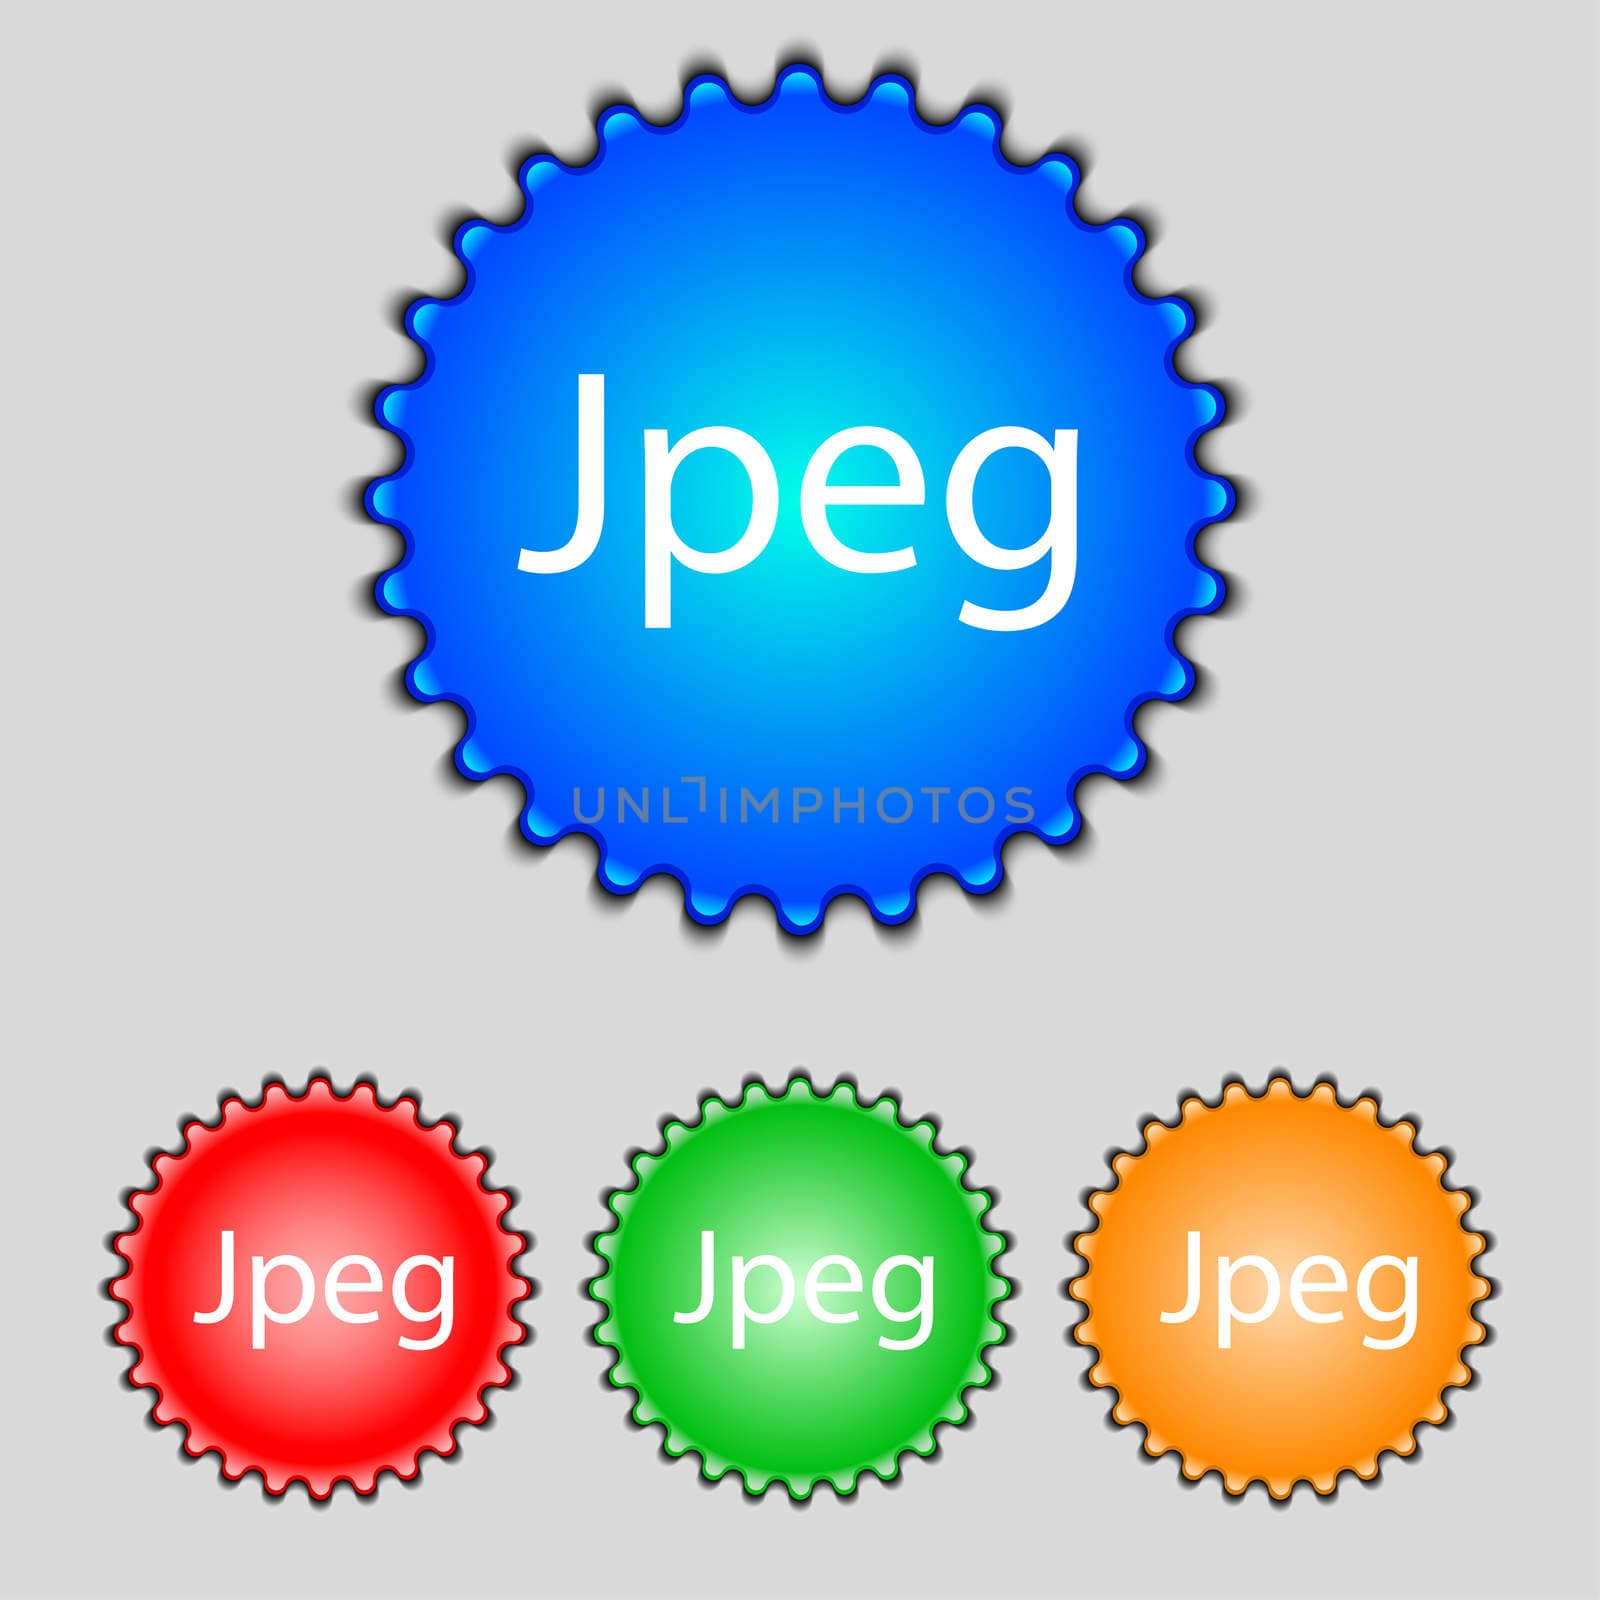 File JPG sign icon. Download image file symbol. Set of colored buttons.  by serhii_lohvyniuk